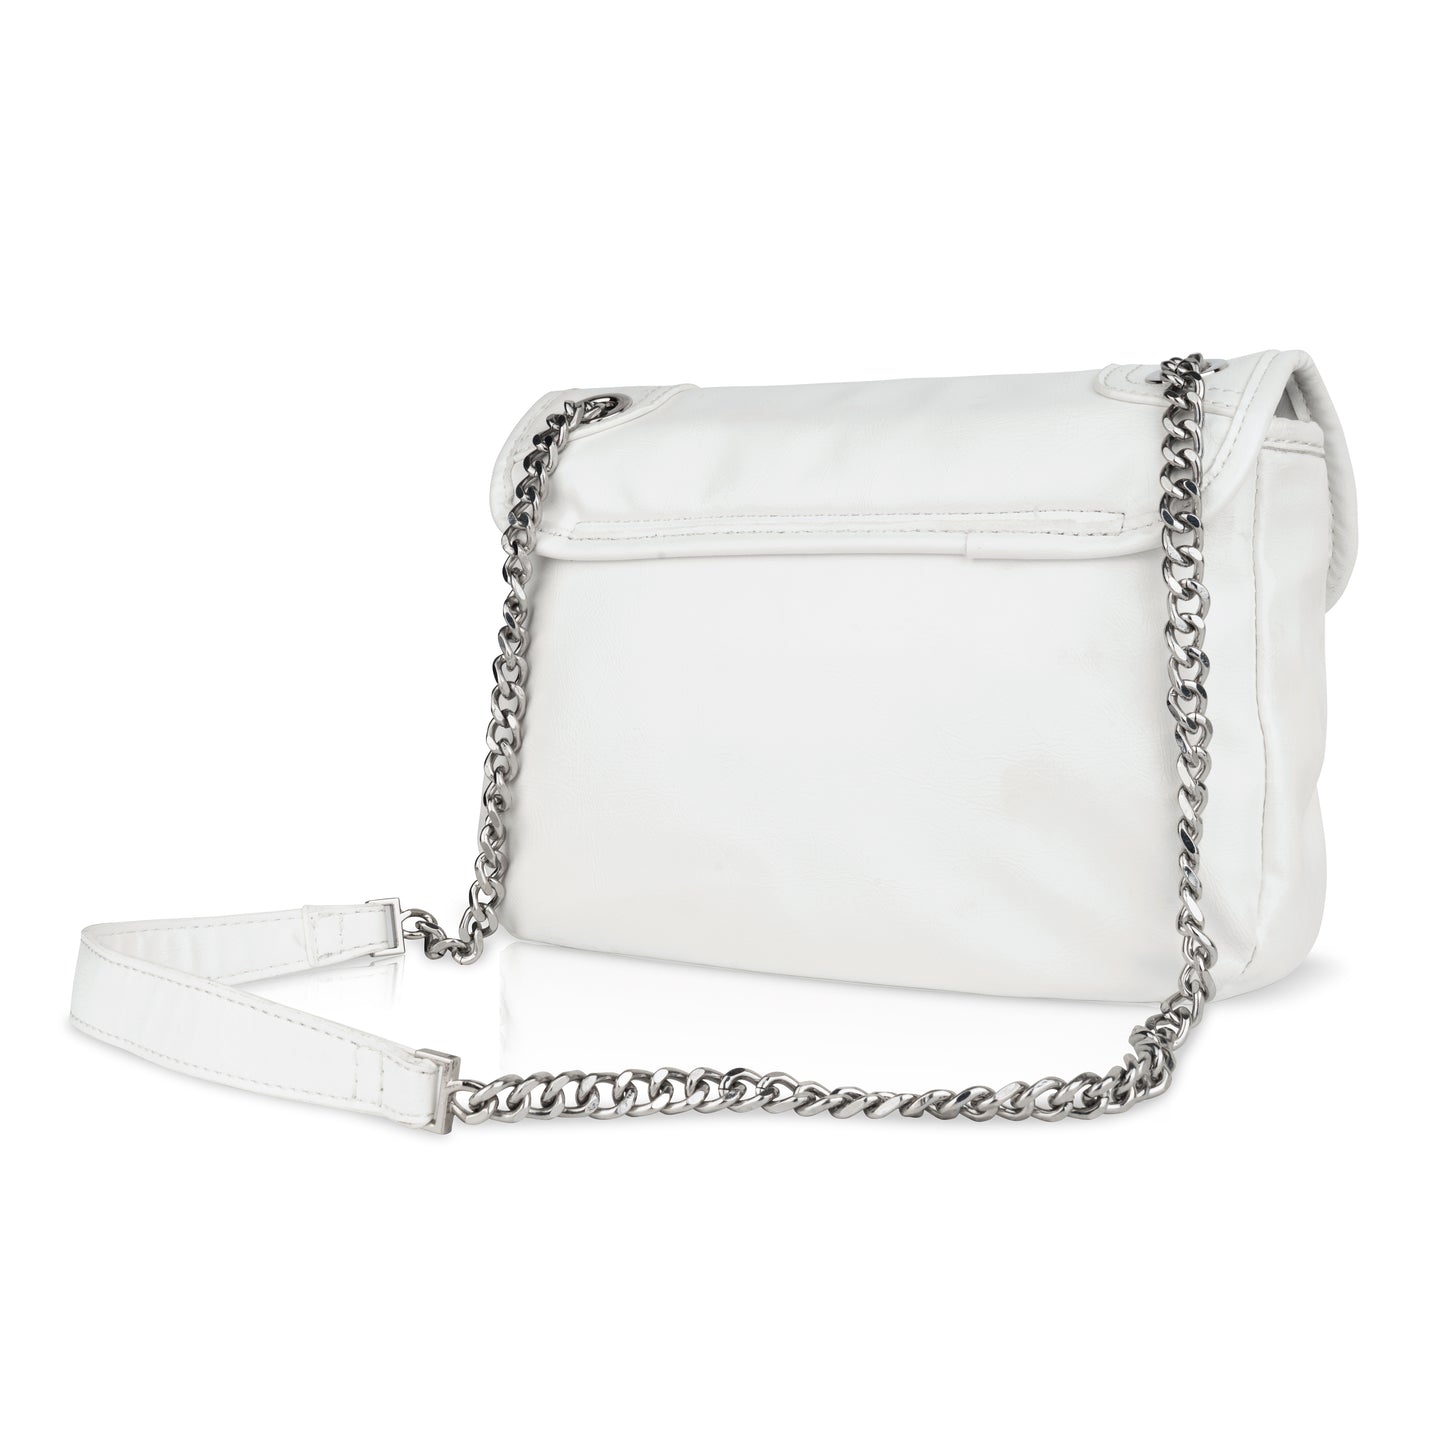 Angeline's thich chain women sling bag